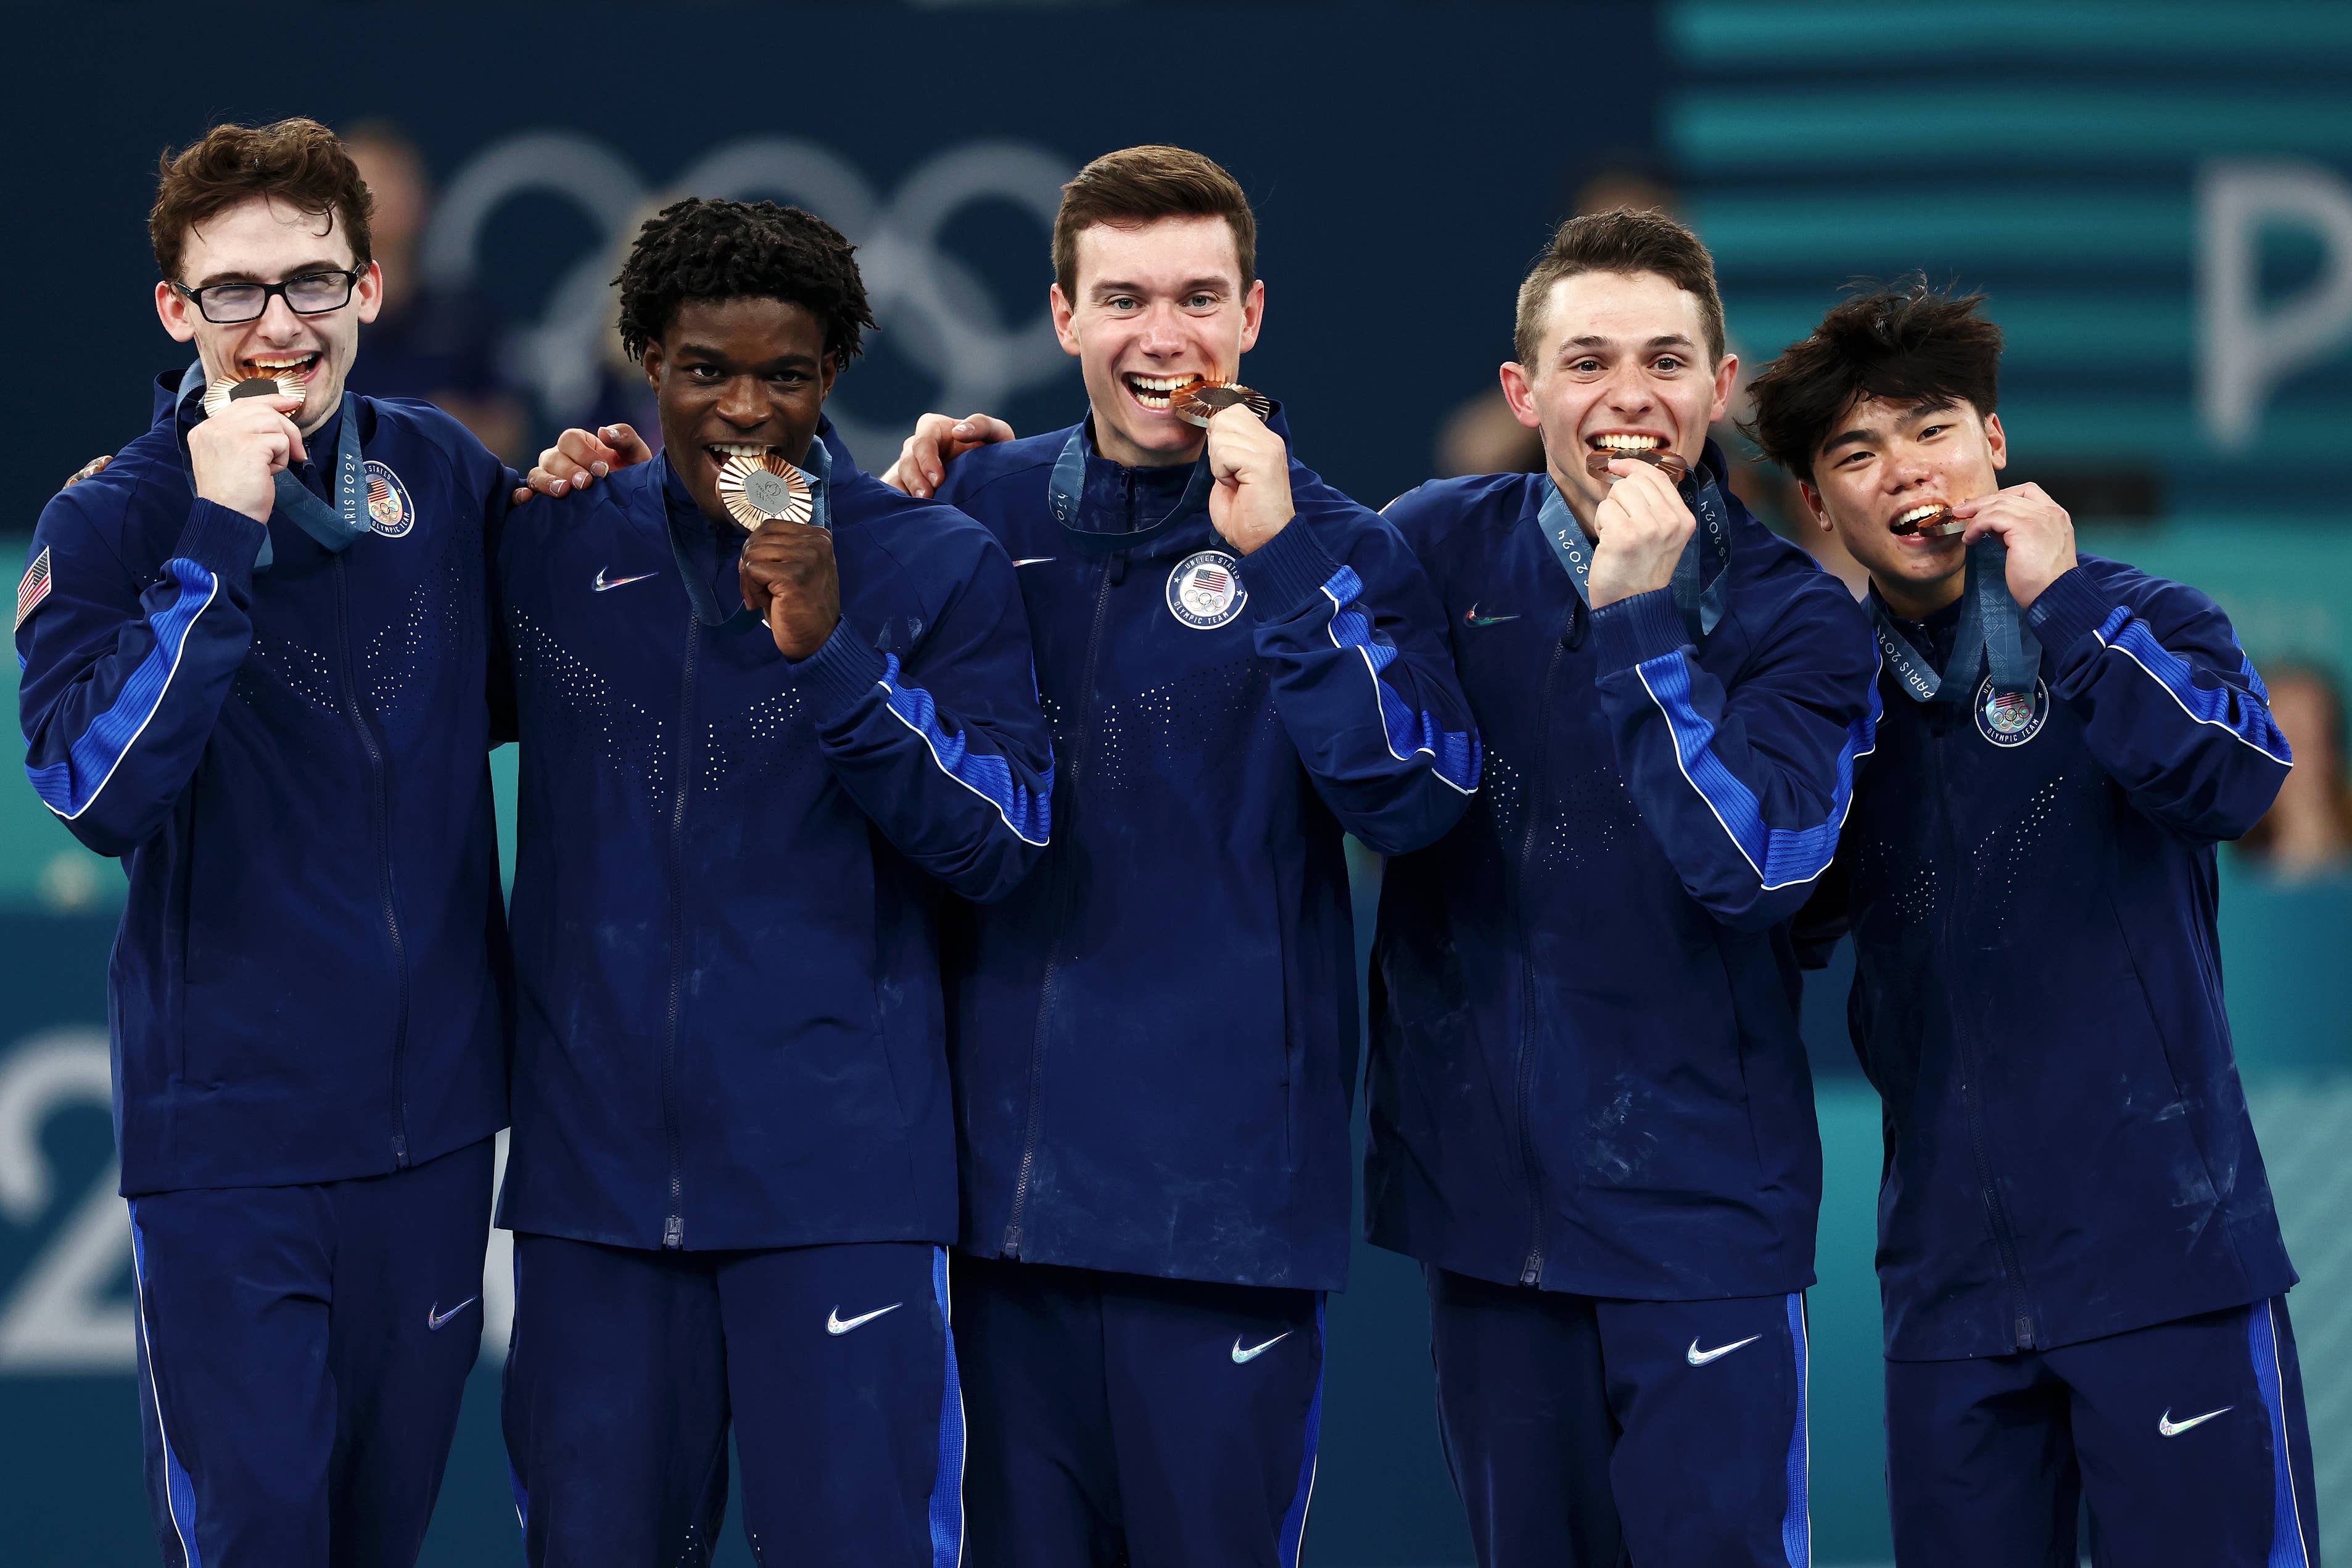 Group of five male athletes in tracksuits, each biting a medal and standing together, celebrating